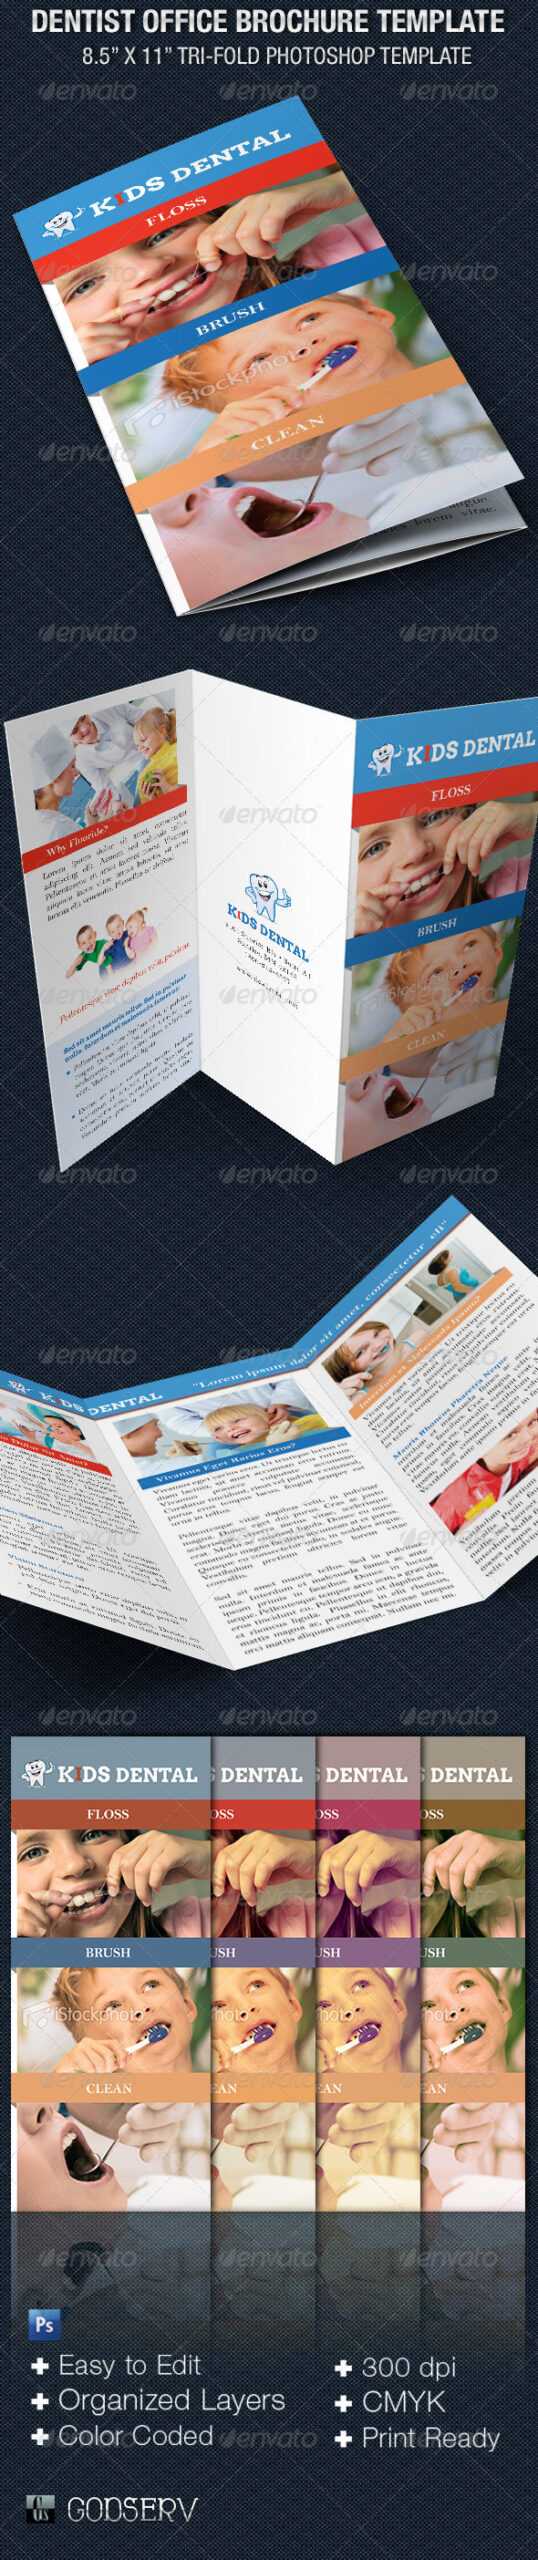 Medical Theme Stationery And Design Templates From Graphicriver For Medical Office Brochure Templates